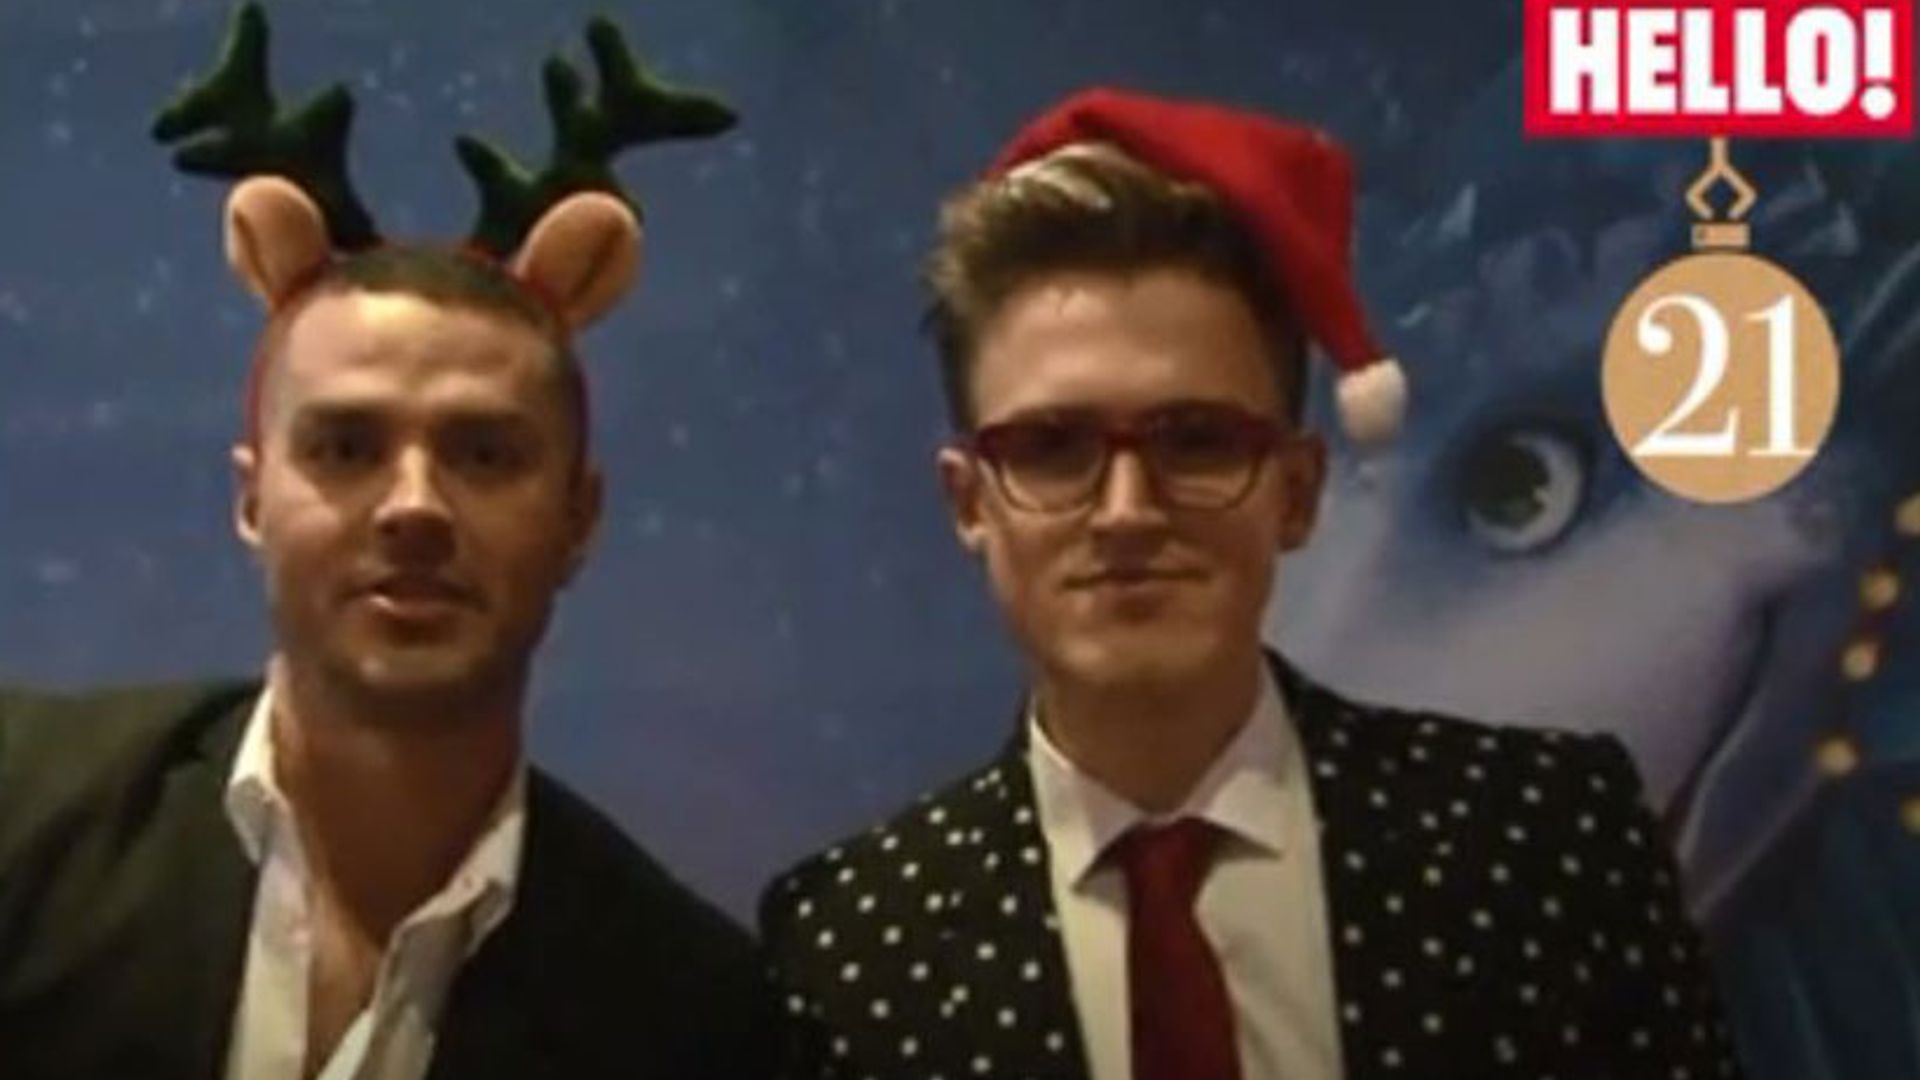 WATCH: Tom Fletcher and Matt Willis reveal what their kids will get up to on Christmas Day